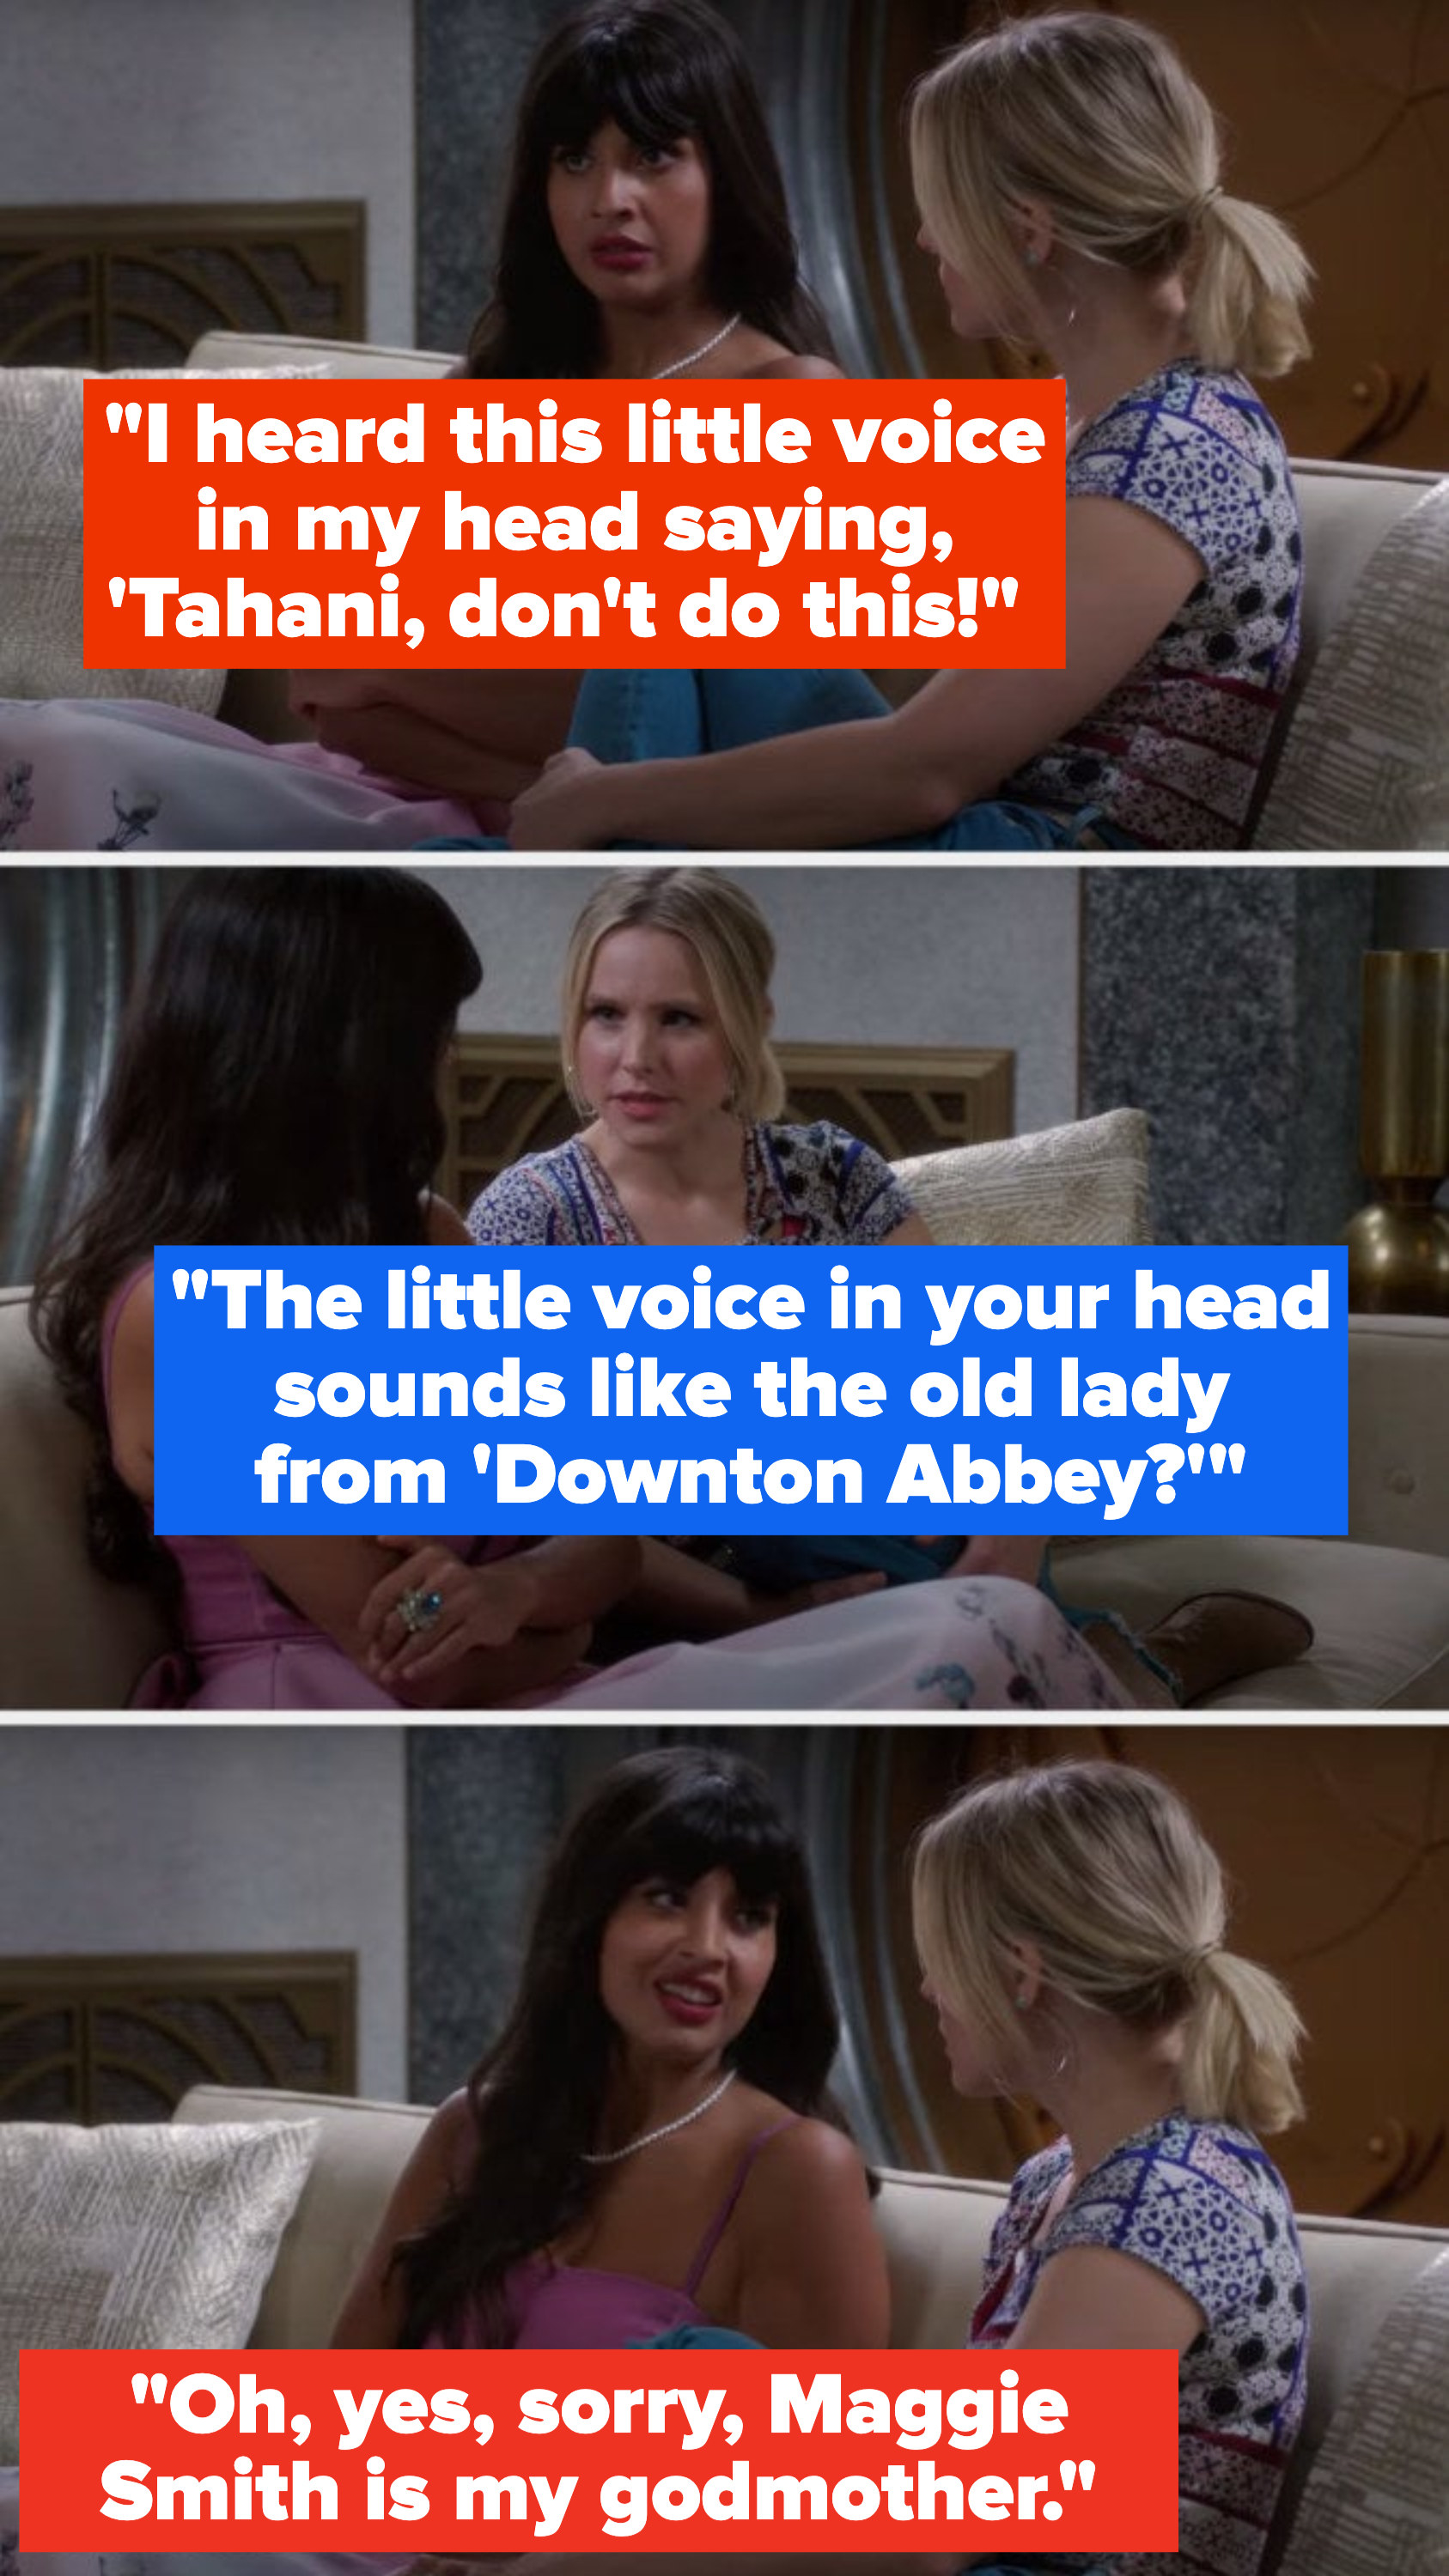 Tahani says, I heard this little voice in my head saying, &#x27;Tahani, don&#x27;t do this, Eleanor asks, The little voice in your head sounds like the old lady from Downton Abbey, and Tahani says, Oh, yes, sorry, Maggie Smith is my godmother